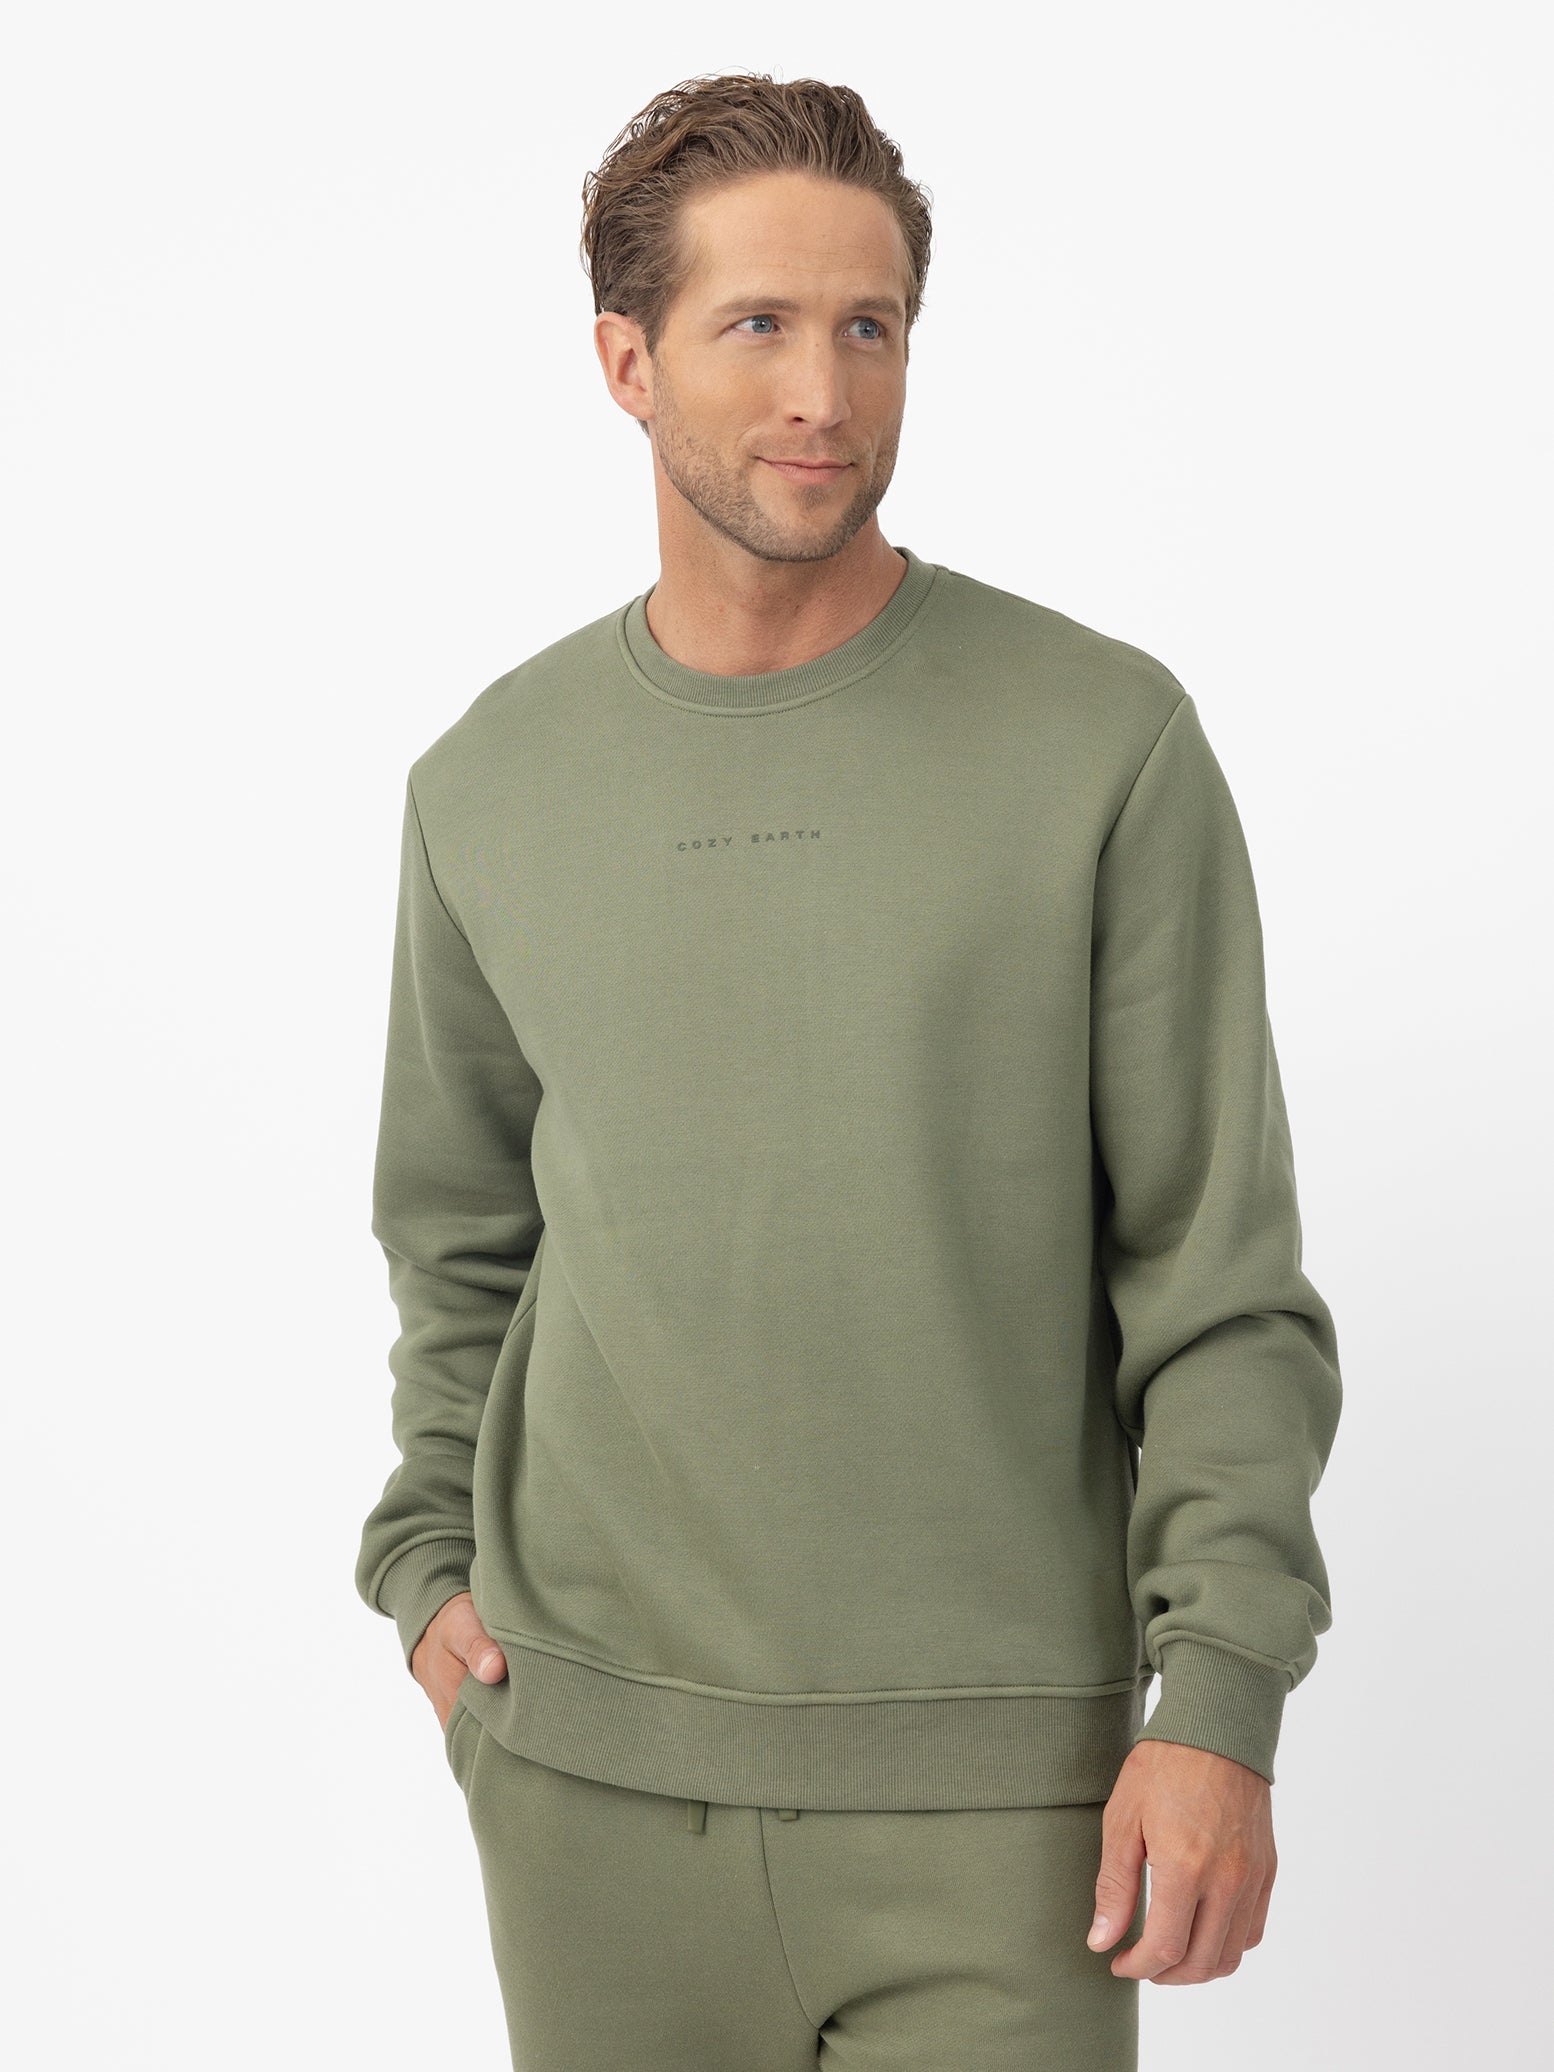 Man wearing Juniper cityscape crewneck with white background 